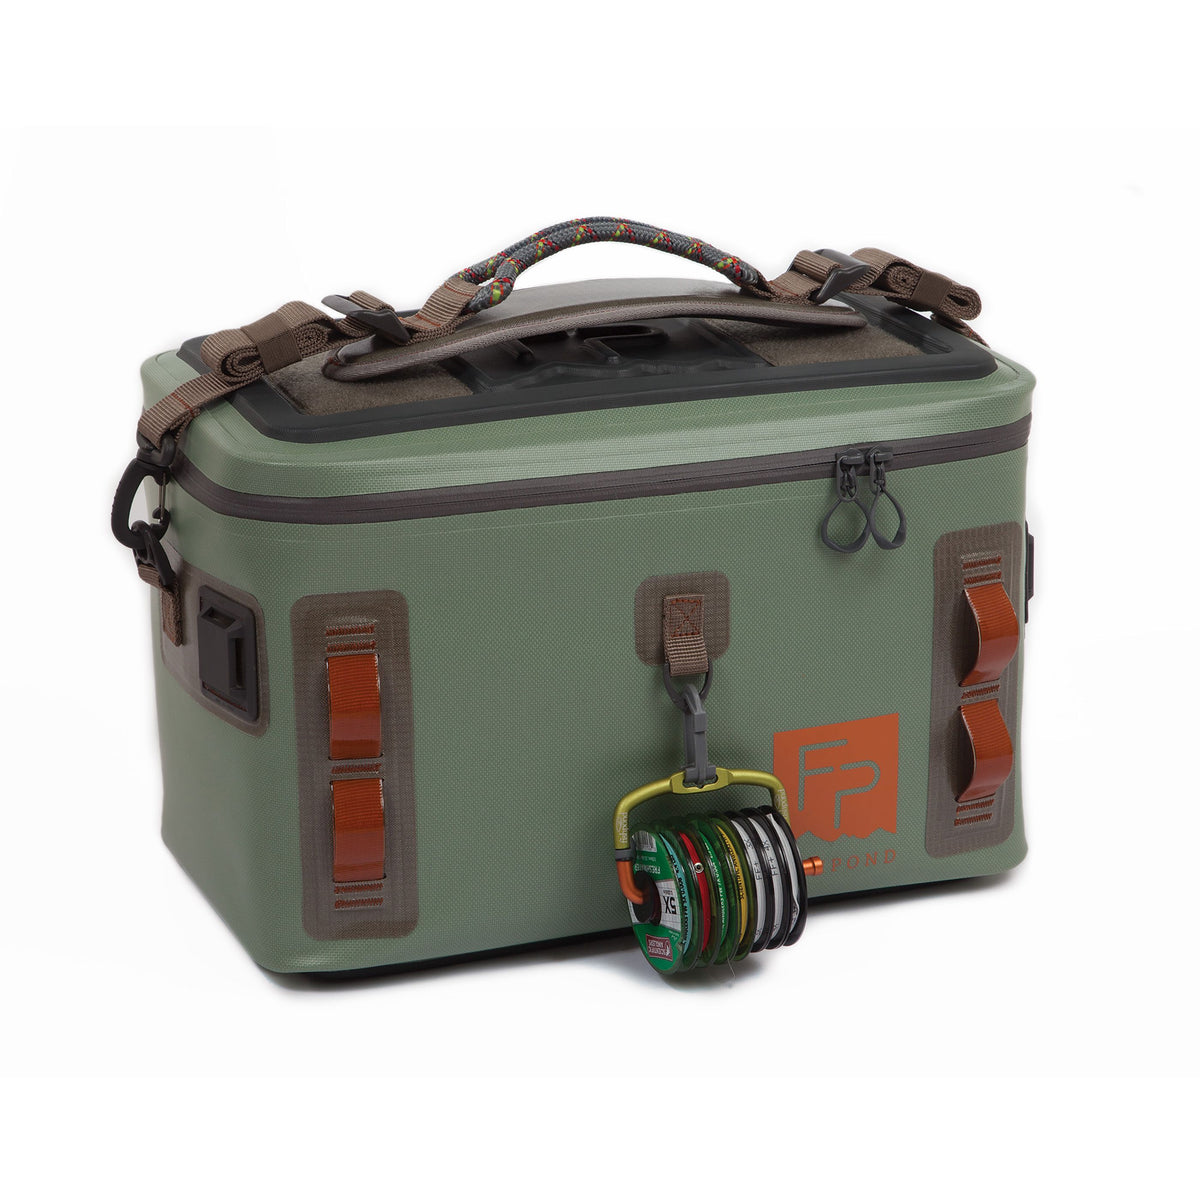 STRAITS FLY SHOPFishpond Cutbank Gear Bag Your Next On The Water Gear  Sanctuary. Designed to organize gear and keep it dry. With the Fishpond  signature molded bottom and welded recycled TPU fabric